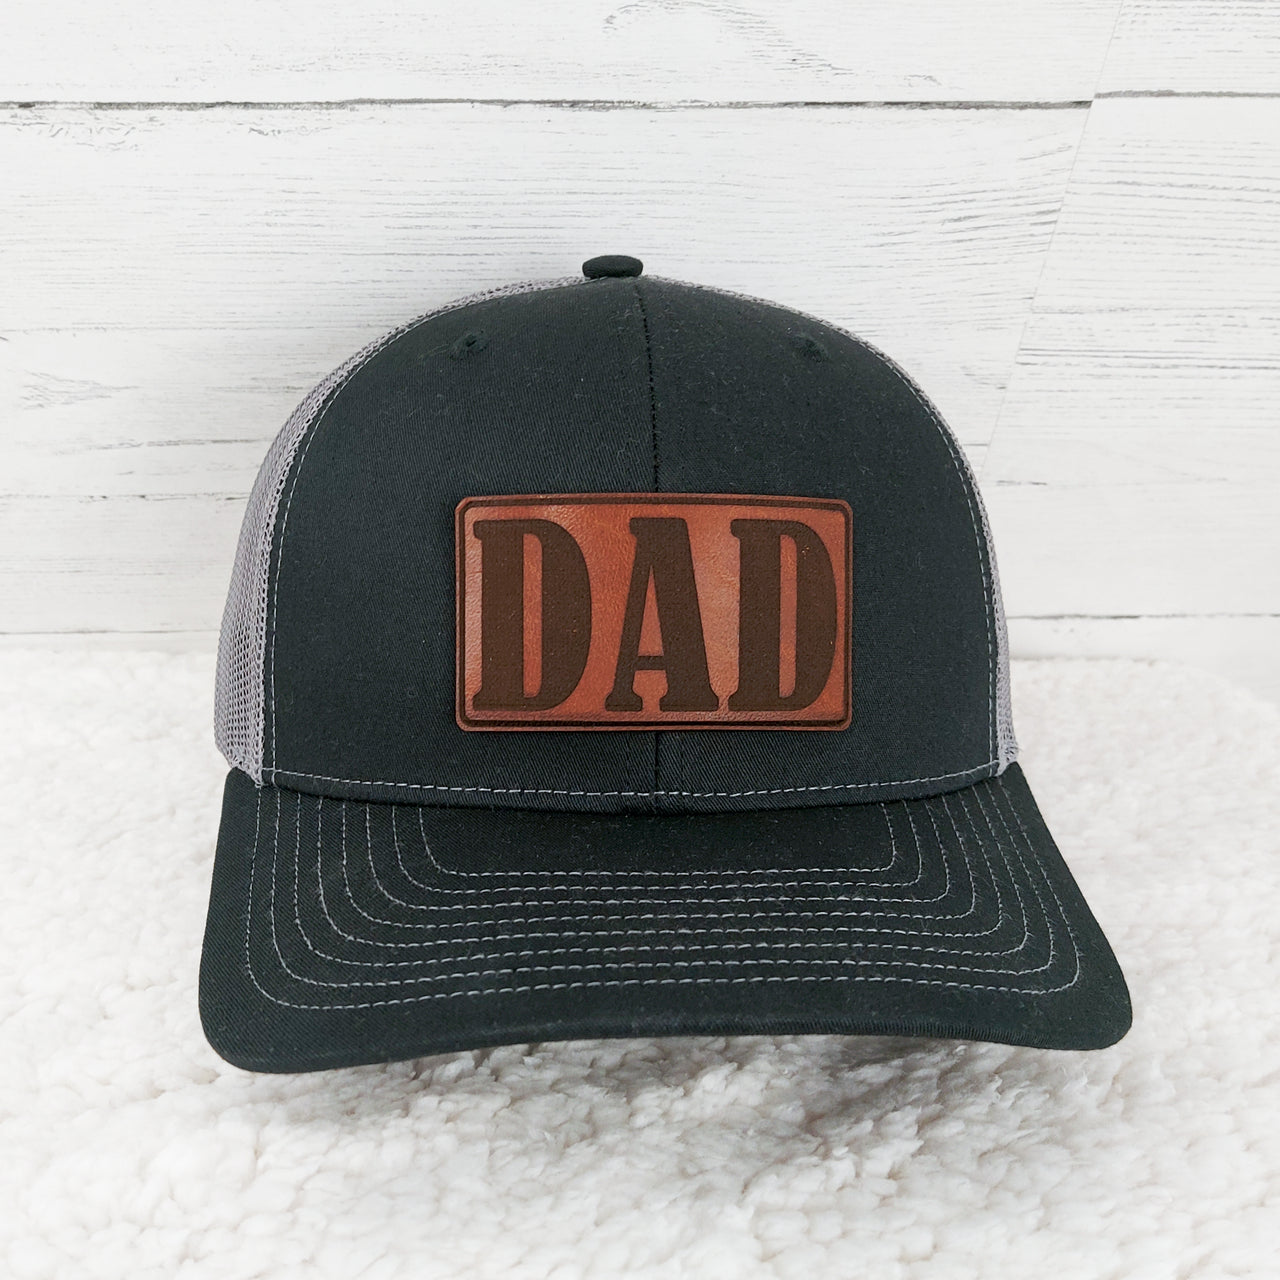 DAD - Black and Grey Richardson Trucker Hat Brown patch